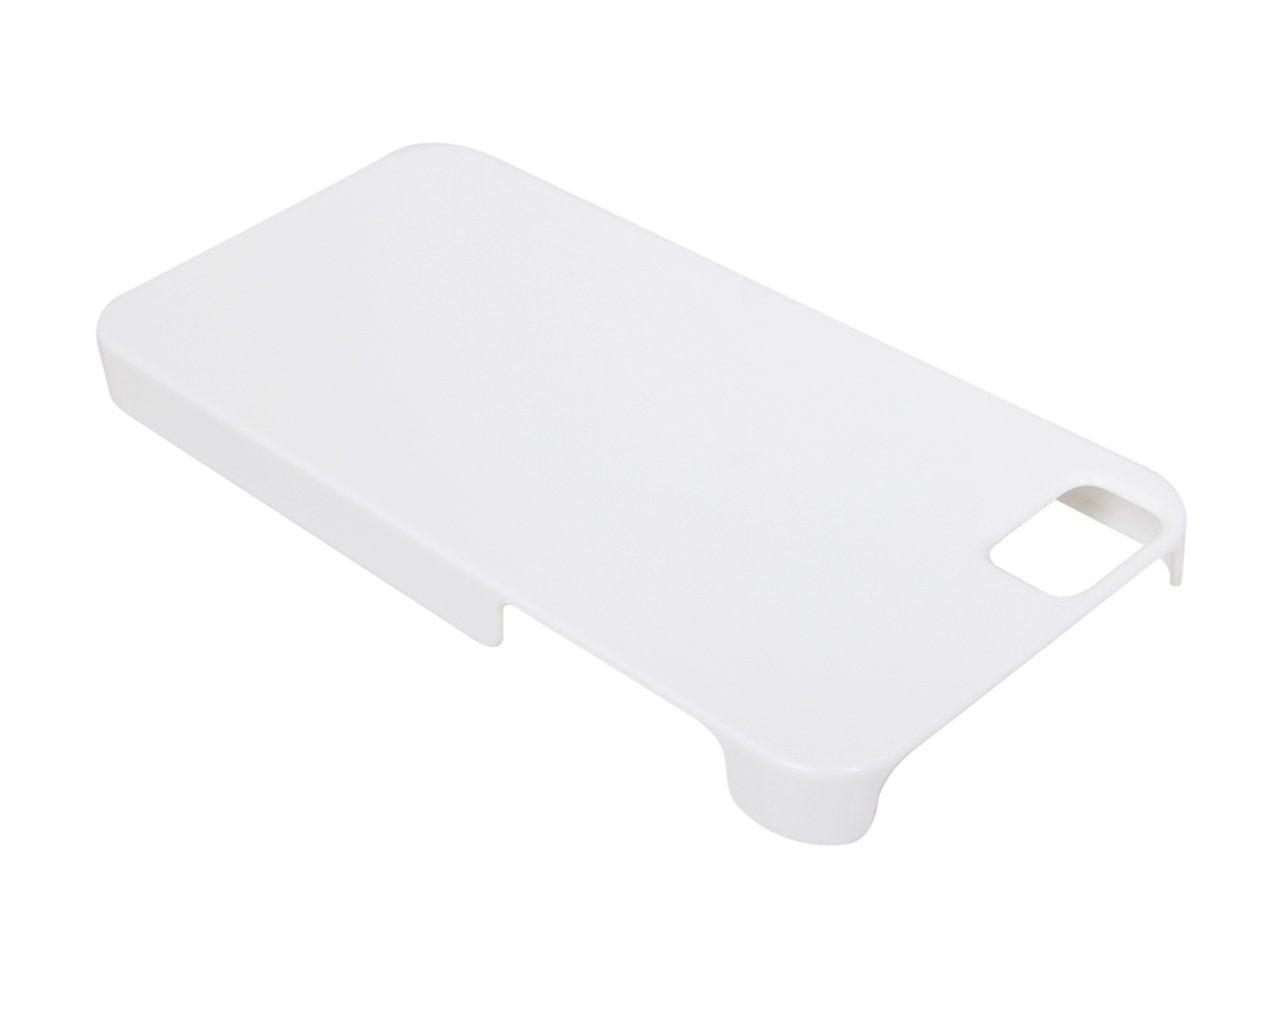 The Joy Factory Madrid - Ultra Slim PC Case with Screen Protector for iPhone5/5S, CSD133 (Snow White)